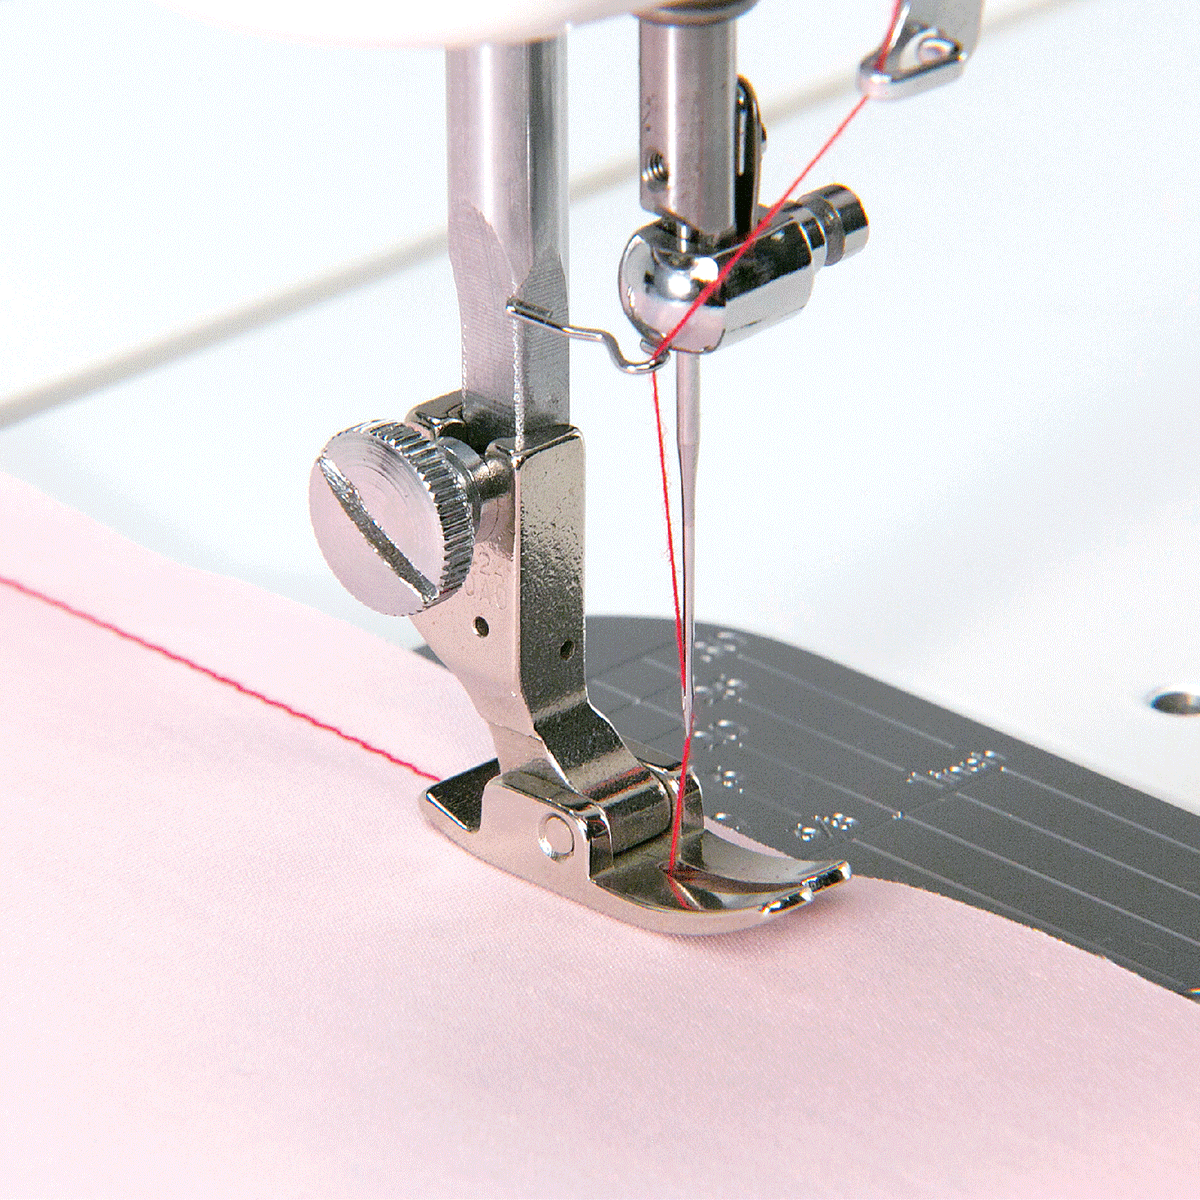 JUKI TL-15 Mid-Arm Quilting and Piecing Sewing Machine close up view of needle